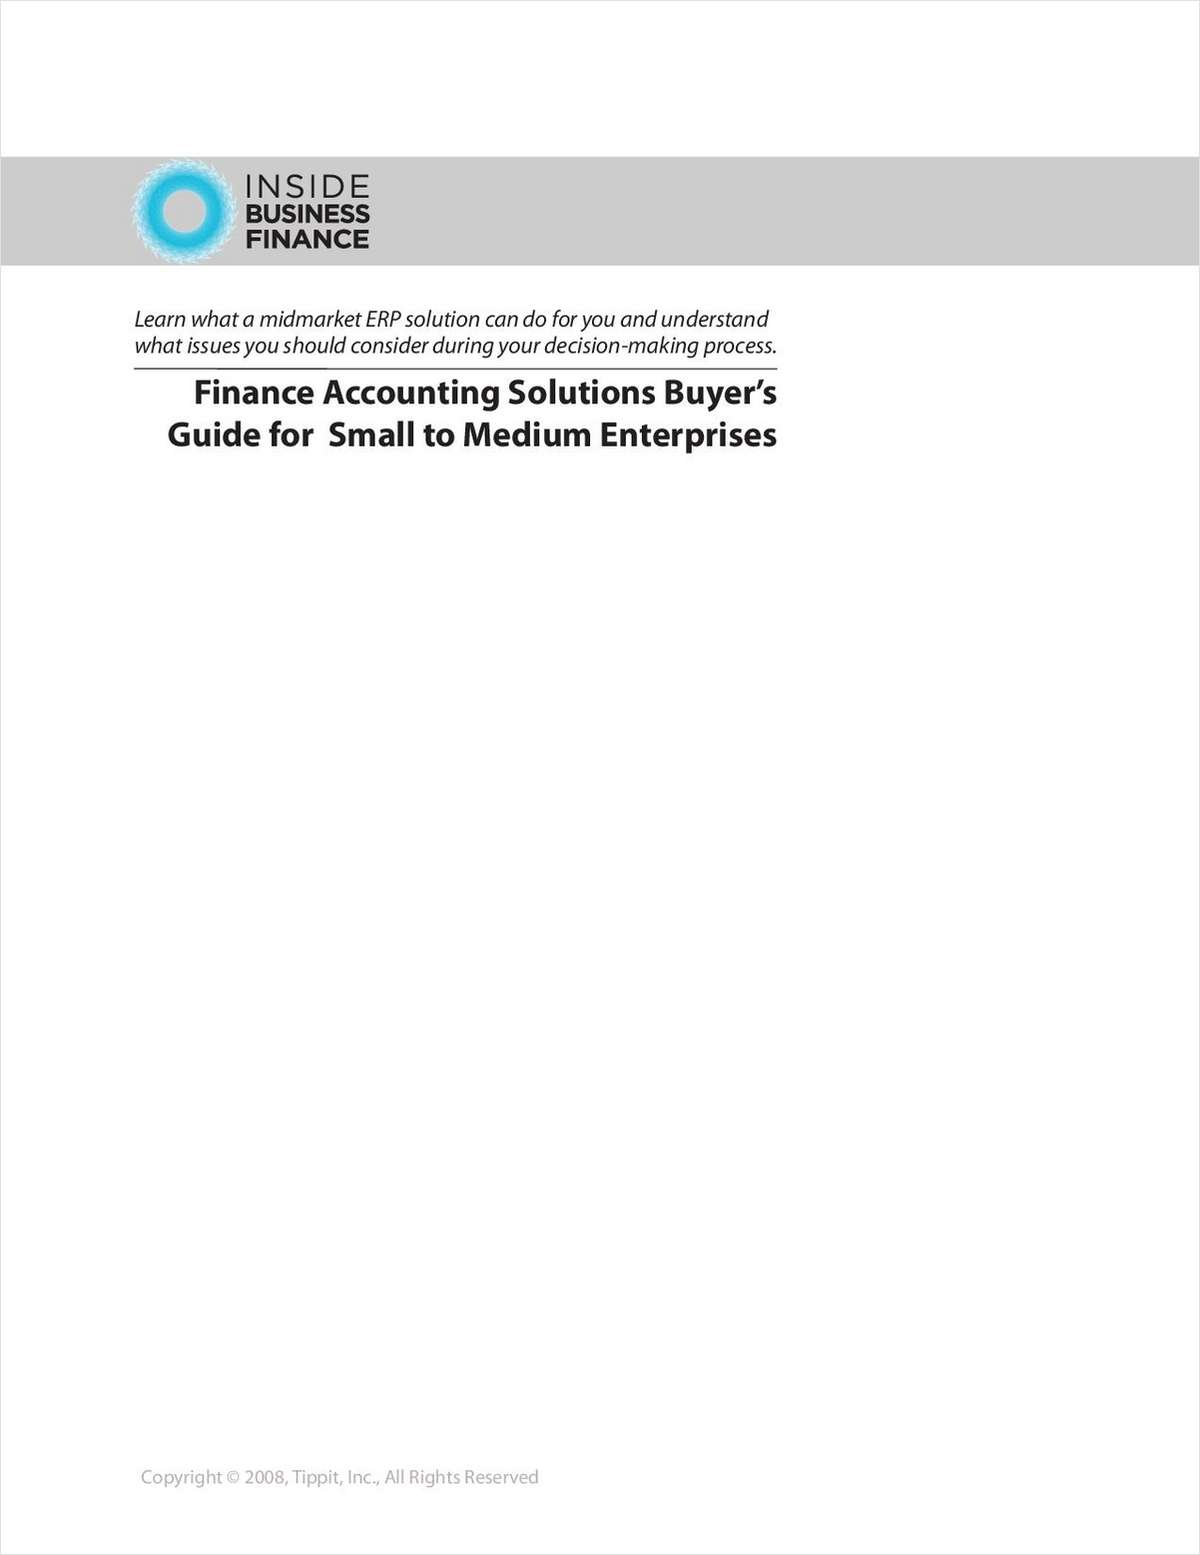 Finance Accounting Solutions Buyer's Guide for Small to Medium Enterprises